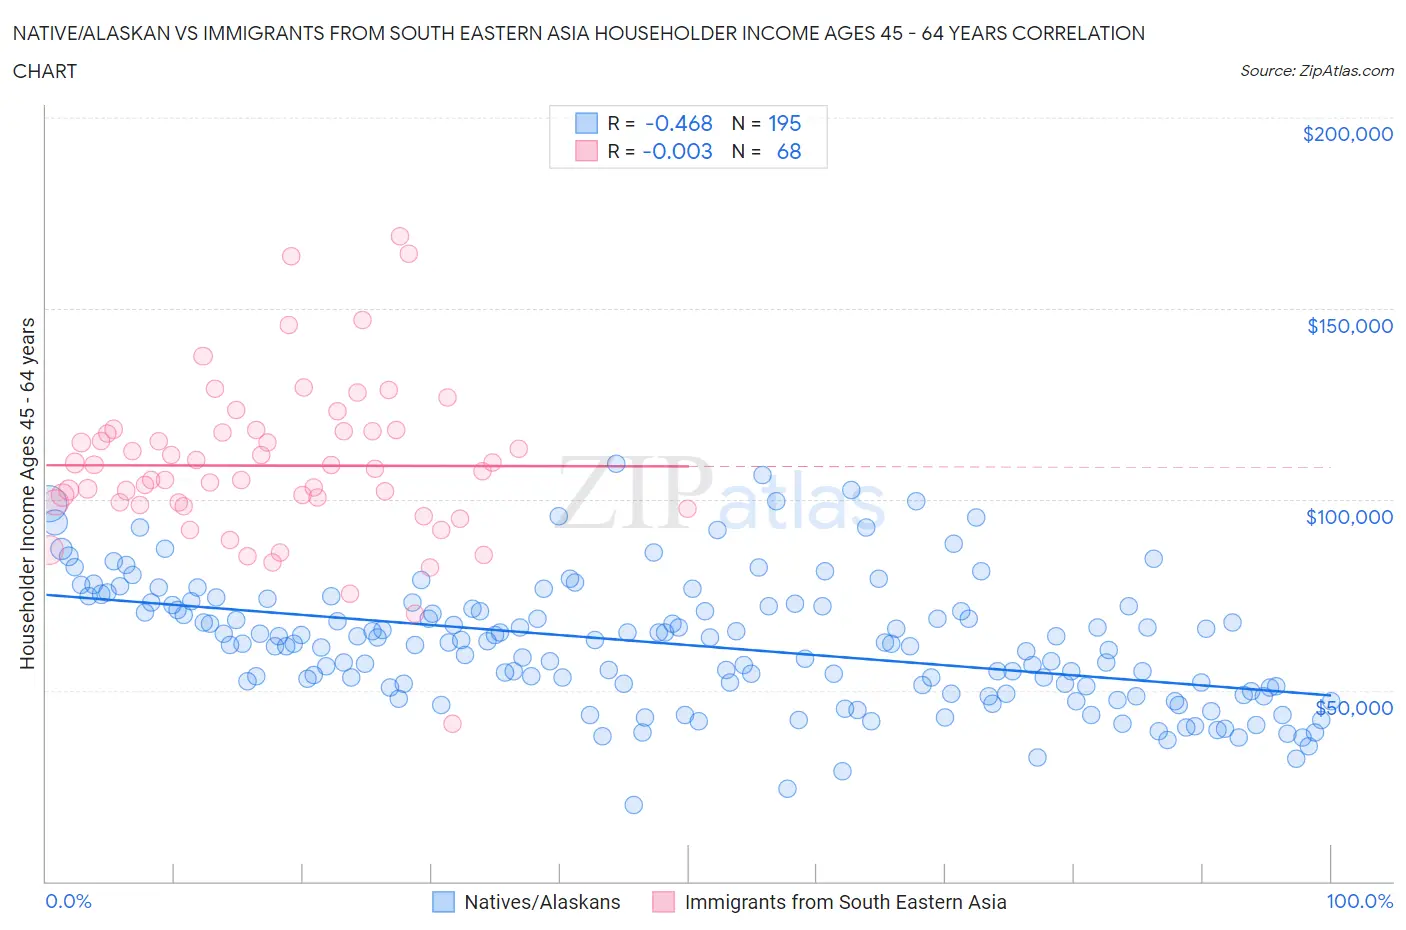 Native/Alaskan vs Immigrants from South Eastern Asia Householder Income Ages 45 - 64 years